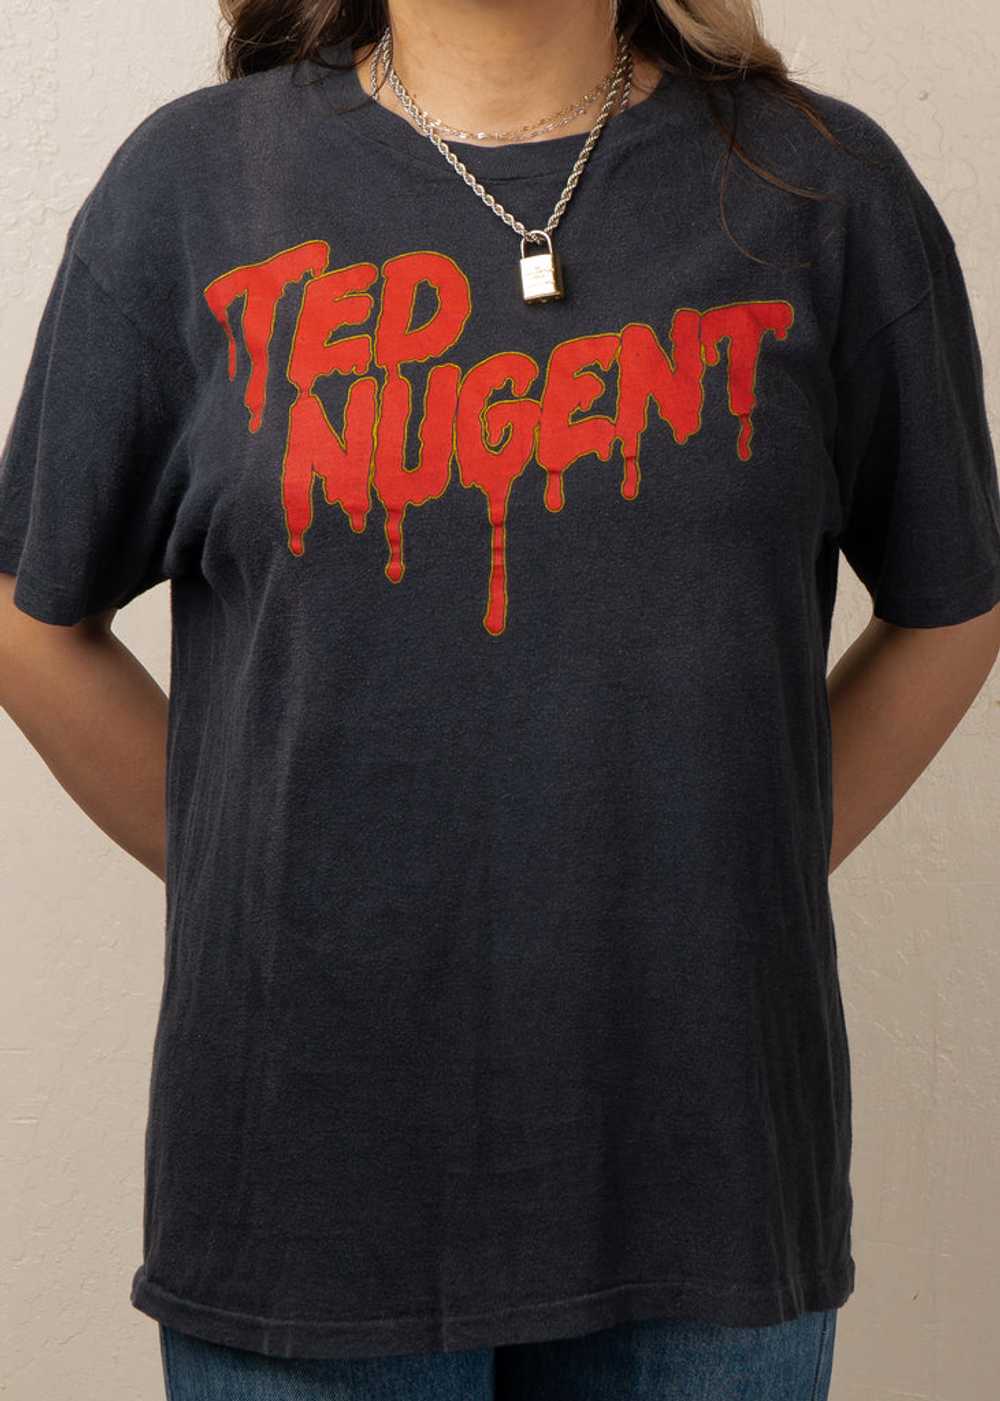 Vintage Rare Ted Nugent 1984 Tour Band Tee - image 5